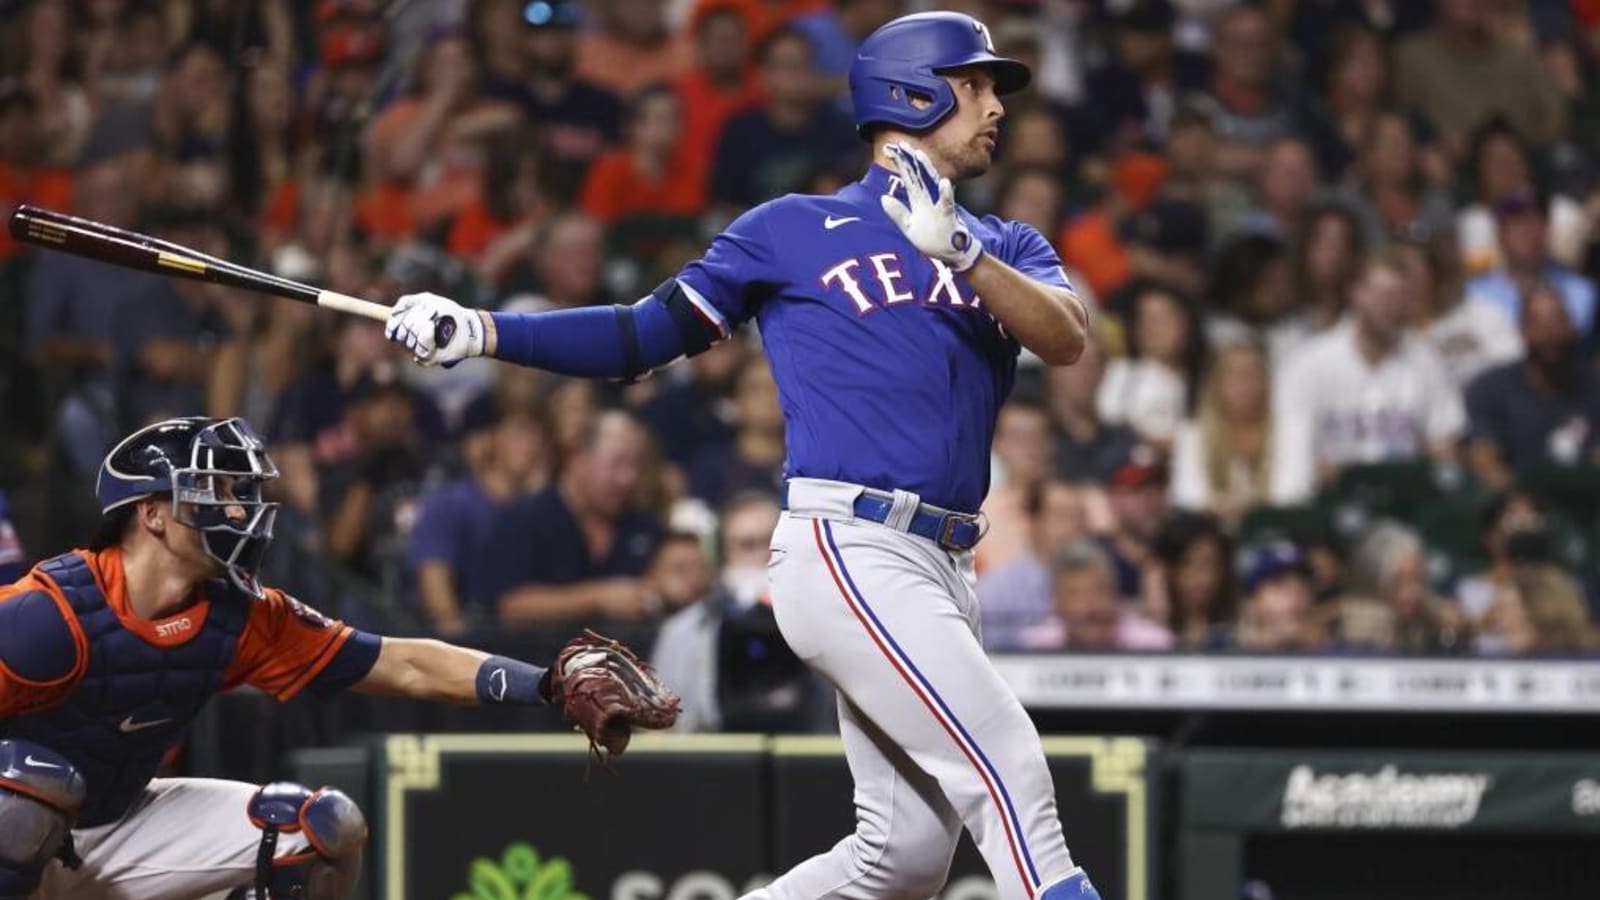 Texas Rangers Lose Middle of the Order Bat to Injury, Will Likely Start Year on IL